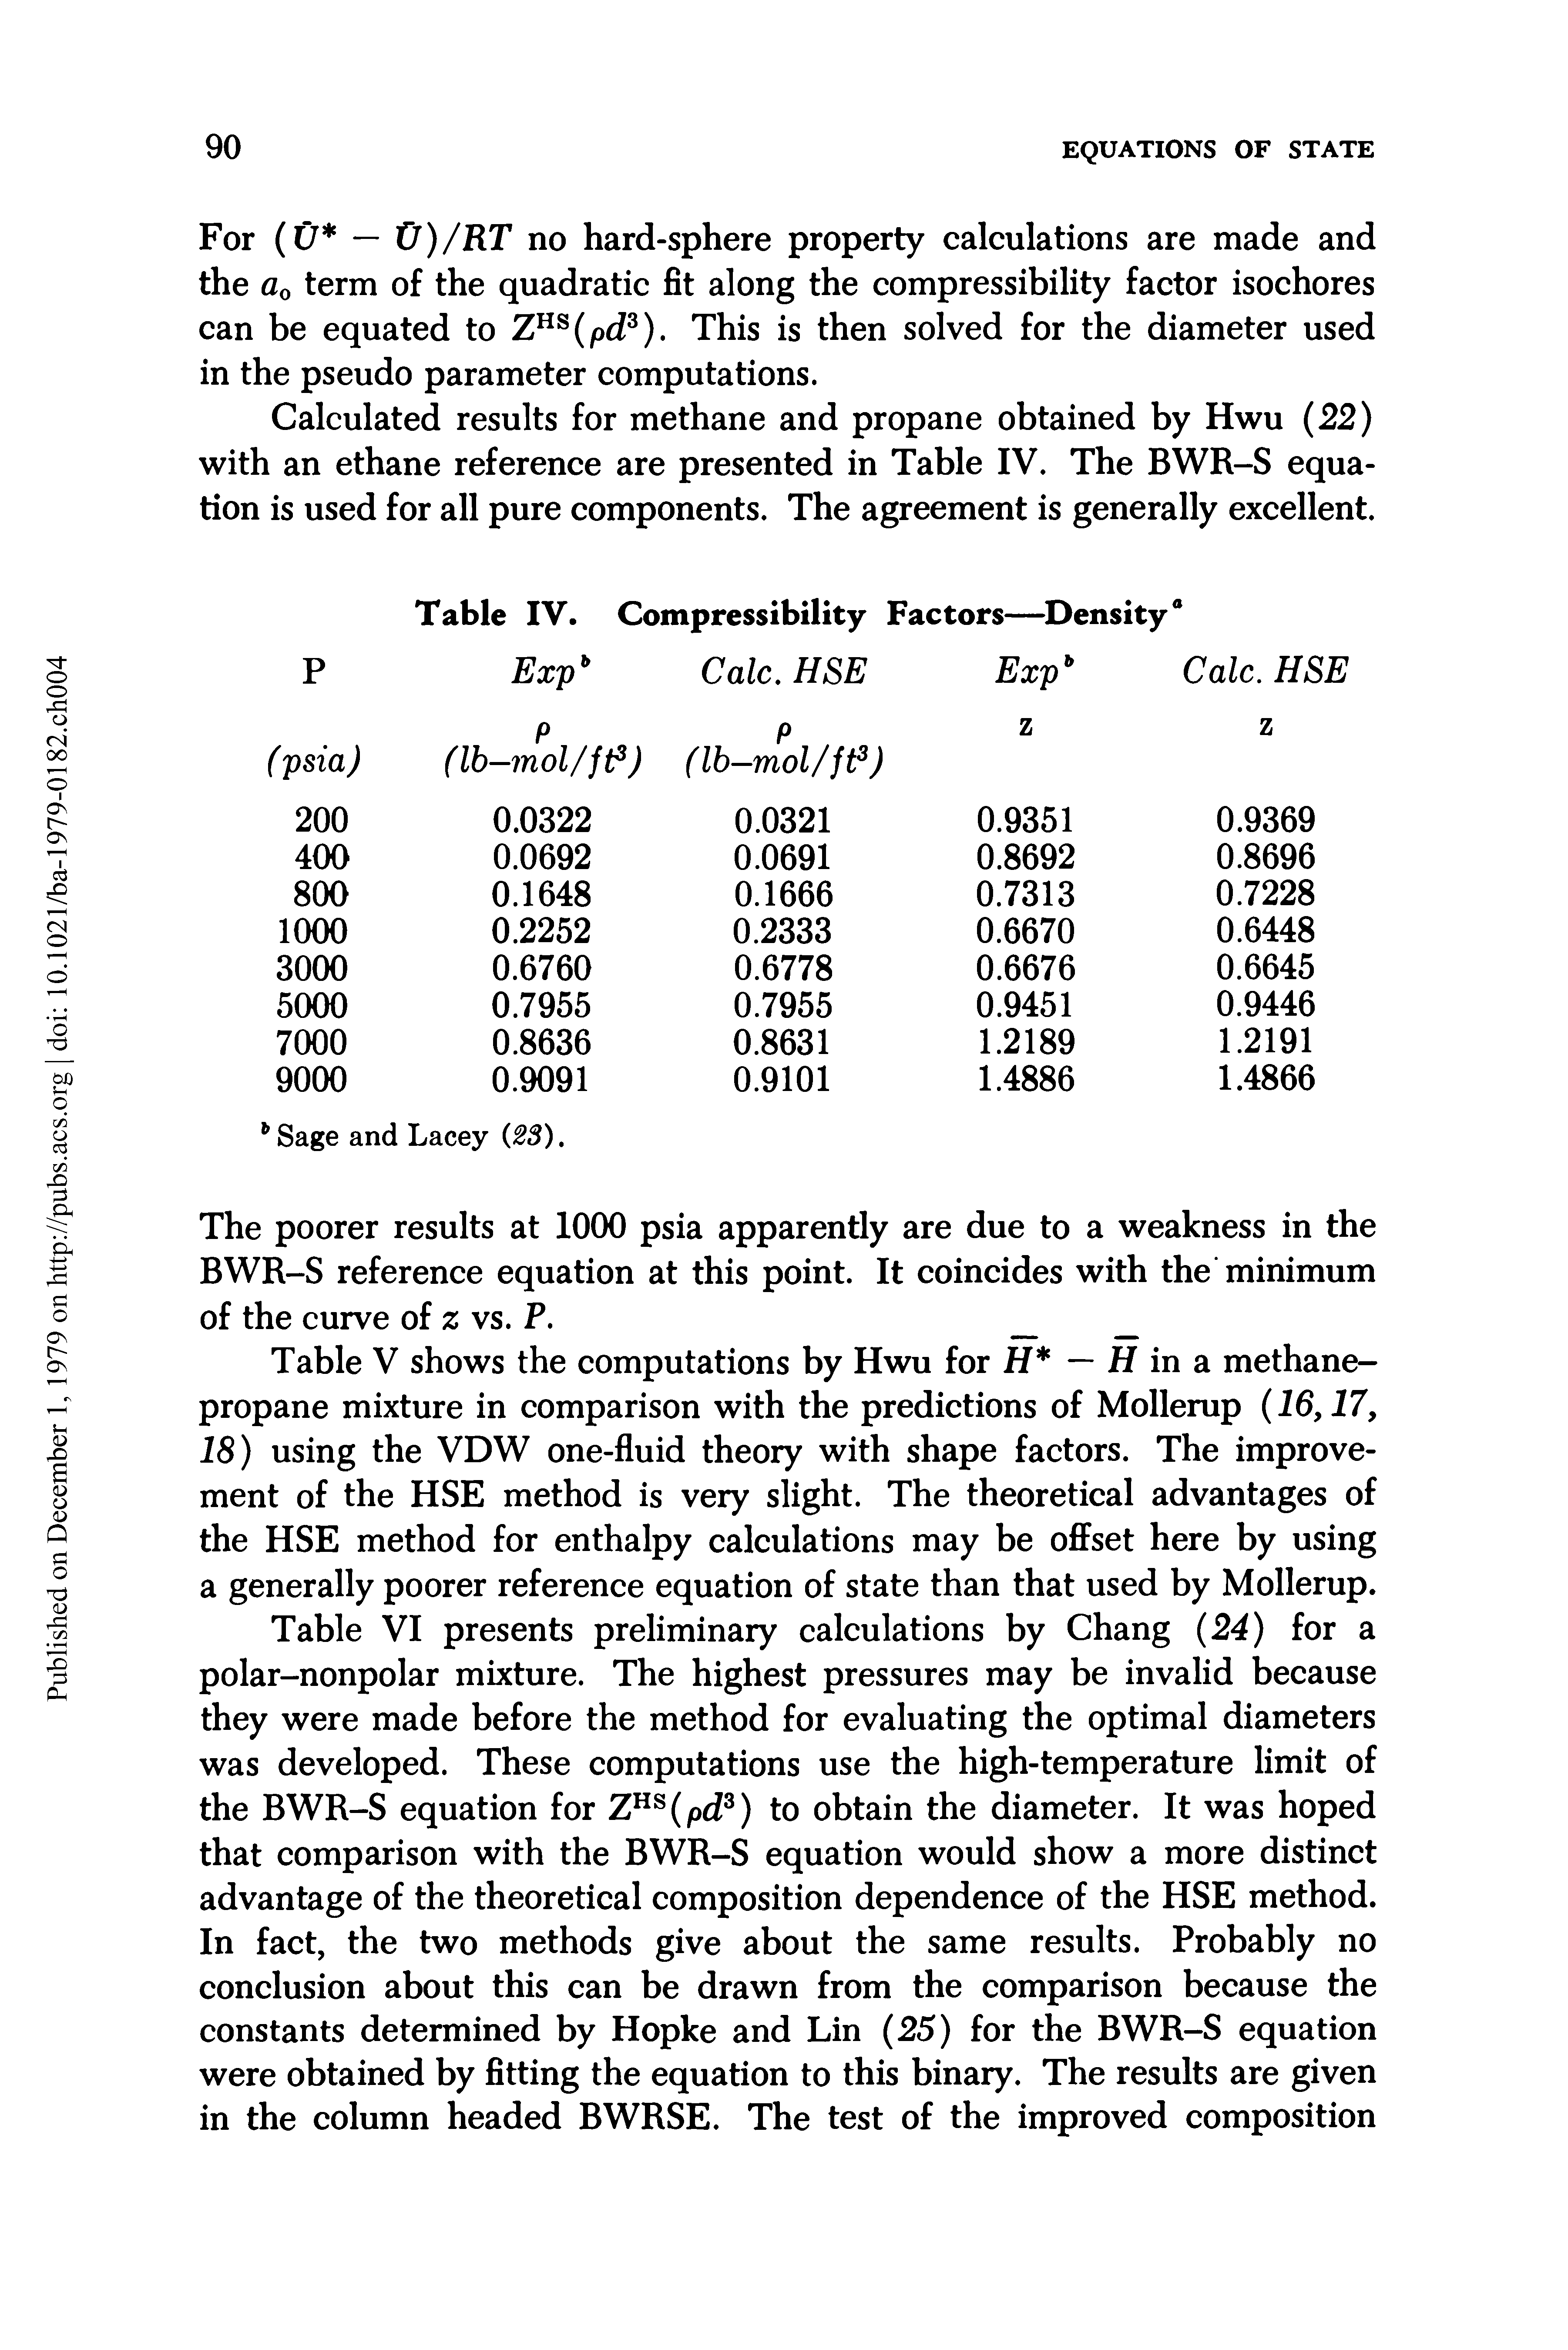 Table VI presents preliminary calculations by Chang (24) for a polar-nonpolar mixture. The highest pressures may be invalid because they were made before the method for evaluating the optimal diameters was developed. These computations use the high-temperature limit of the BWR-S equation for ZHs(pd3) to obtain the diameter. It was hoped that comparison with the BWR-S equation would show a more distinct advantage of the theoretical composition dependence of the HSE method. In fact, the two methods give about the same results. Probably no conclusion about this can be drawn from the comparison because the constants determined by Hopke and Lin (25) for the BWR-S equation were obtained by fitting the equation to this binary. The results are given in the column headed BWRSE. The test of the improved composition...